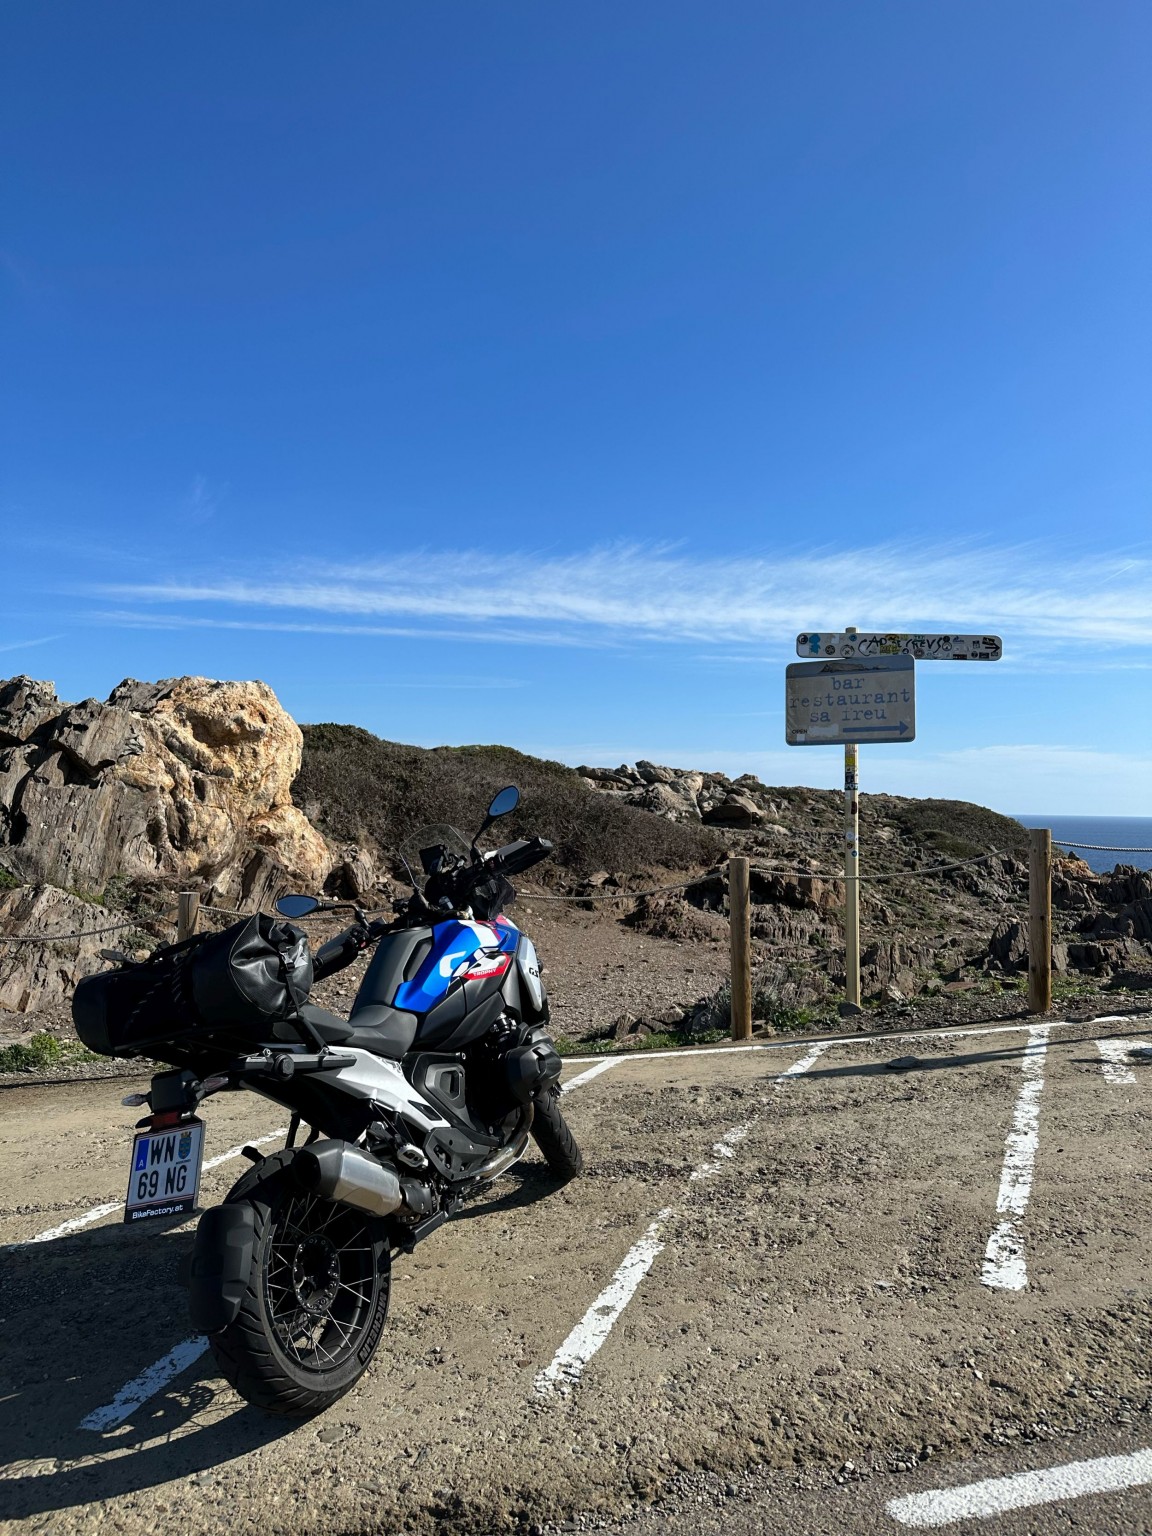 BMW R 1300 GS road test - from Barcelona to Vienna - Image 21